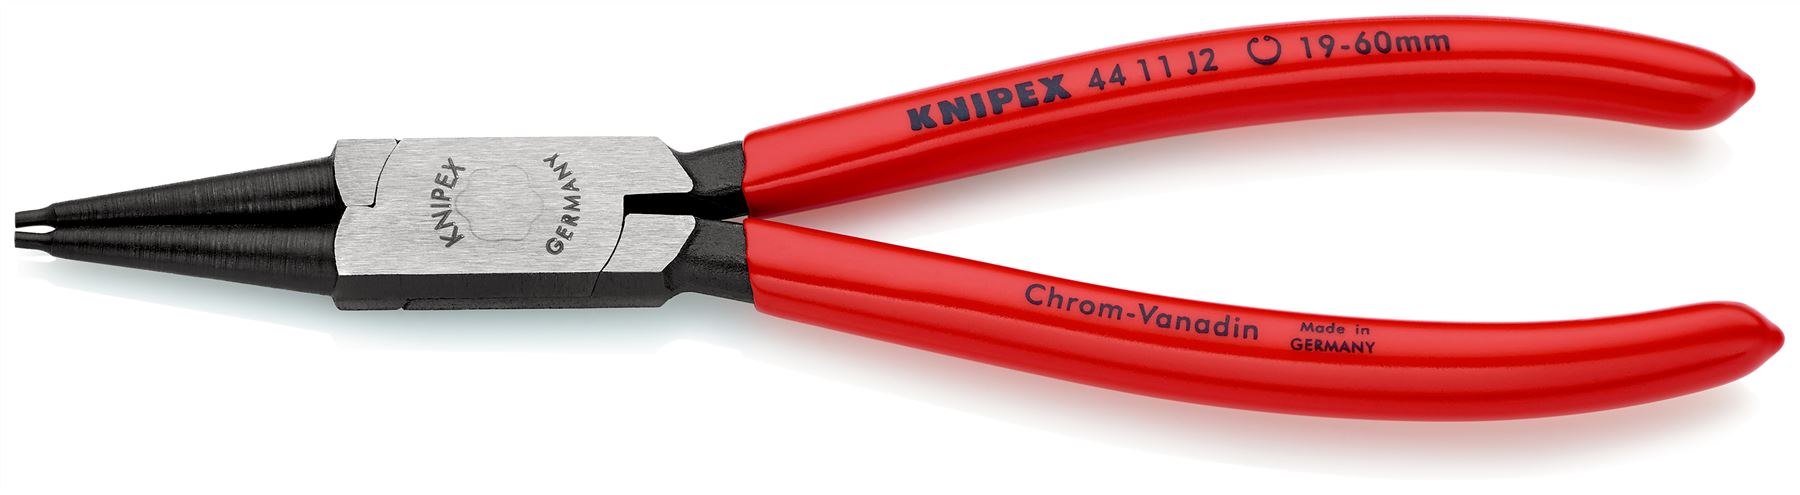 KNIPEX Circlip Pliers for Internal Circlips in Bore Holes 320mm 3.2mm Diameter Tips 44 11 J4 SB